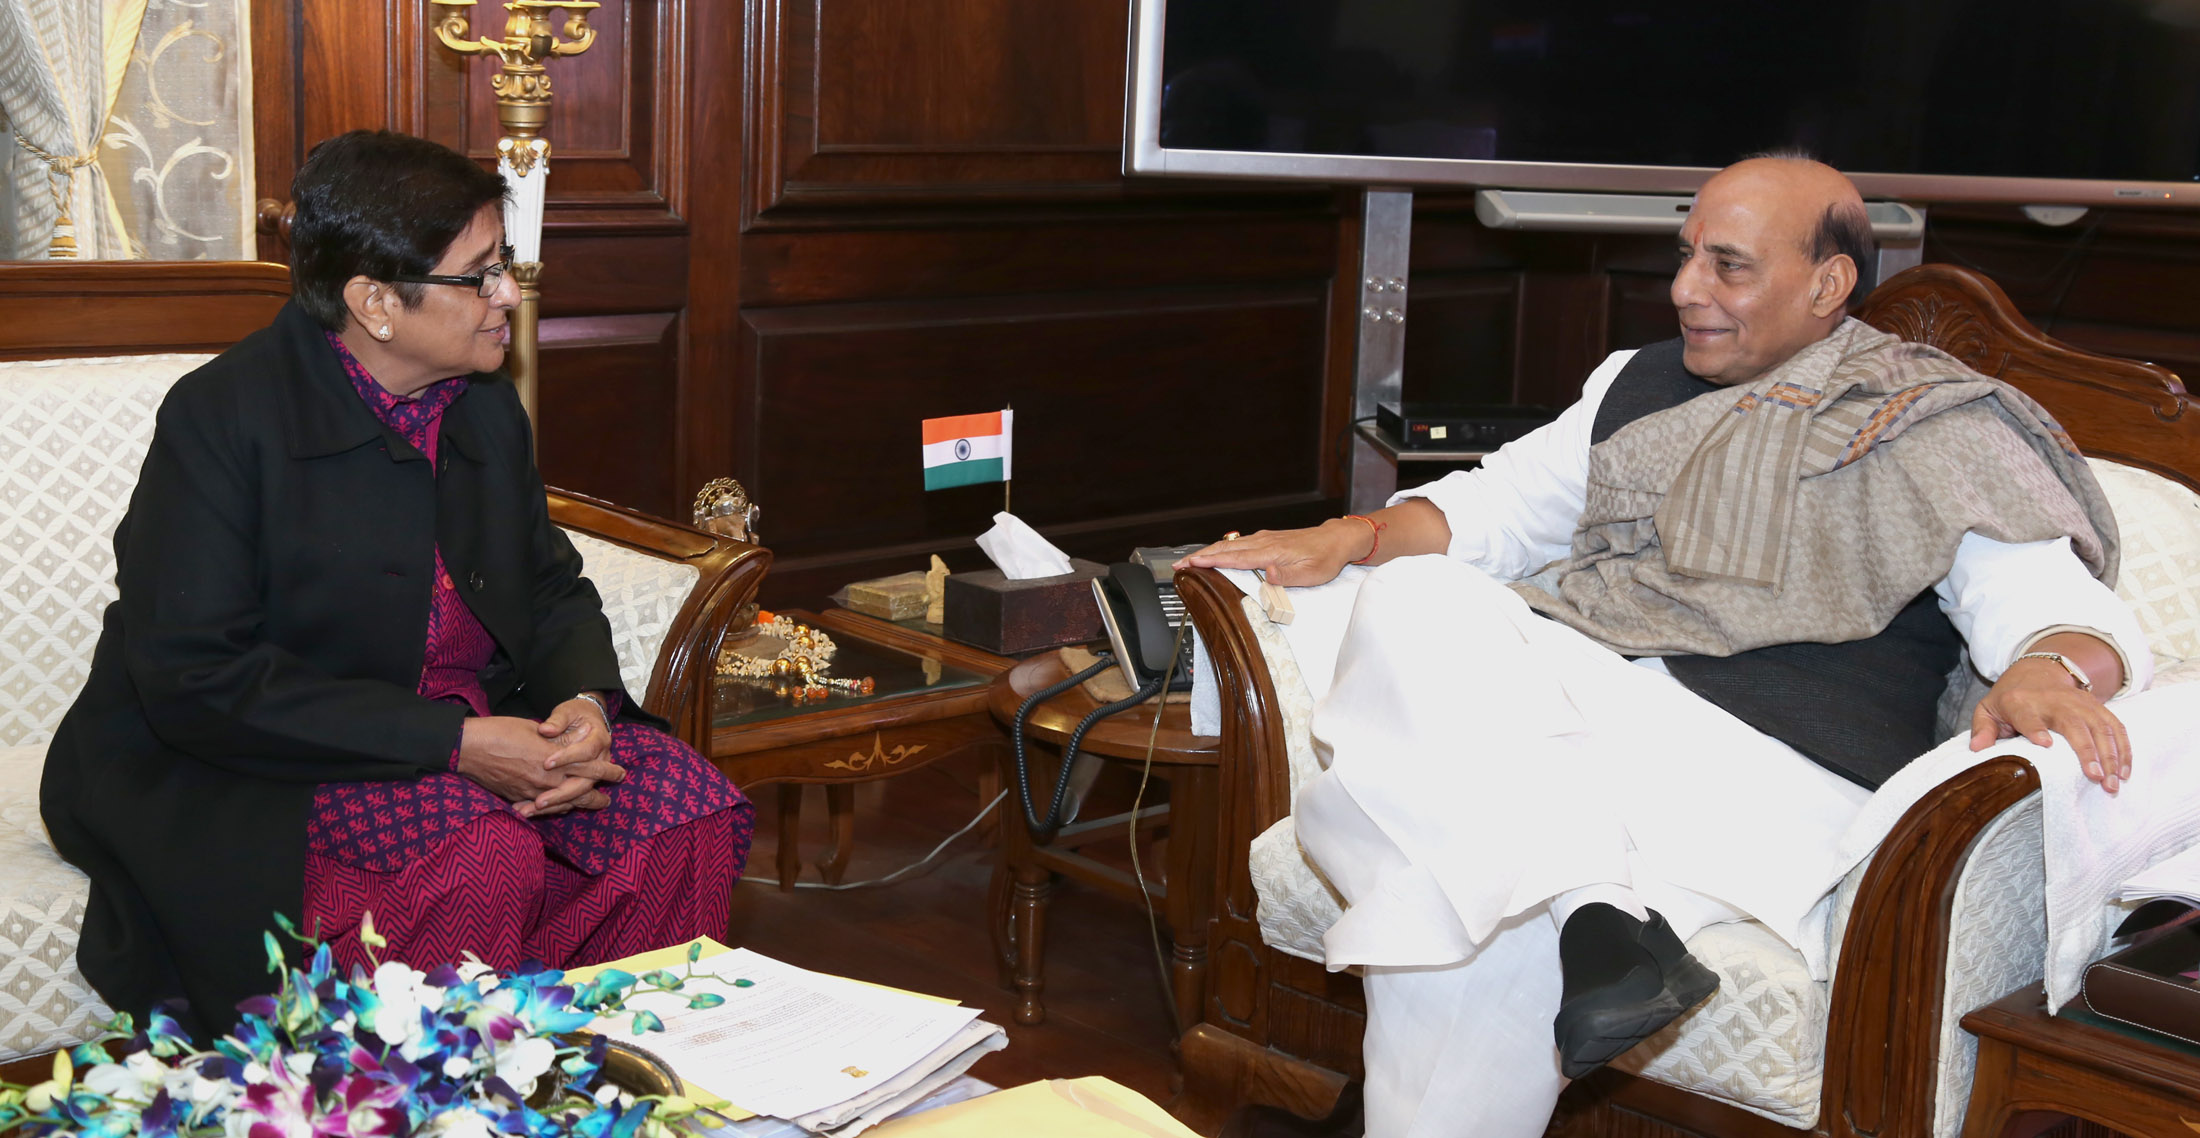 The Lieutenant Governor of Puducherry, Dr. Kiran Bedi calling on the Union Home Minister, Shri Rajnath Singh, in New Delhi on January 20, 2017.